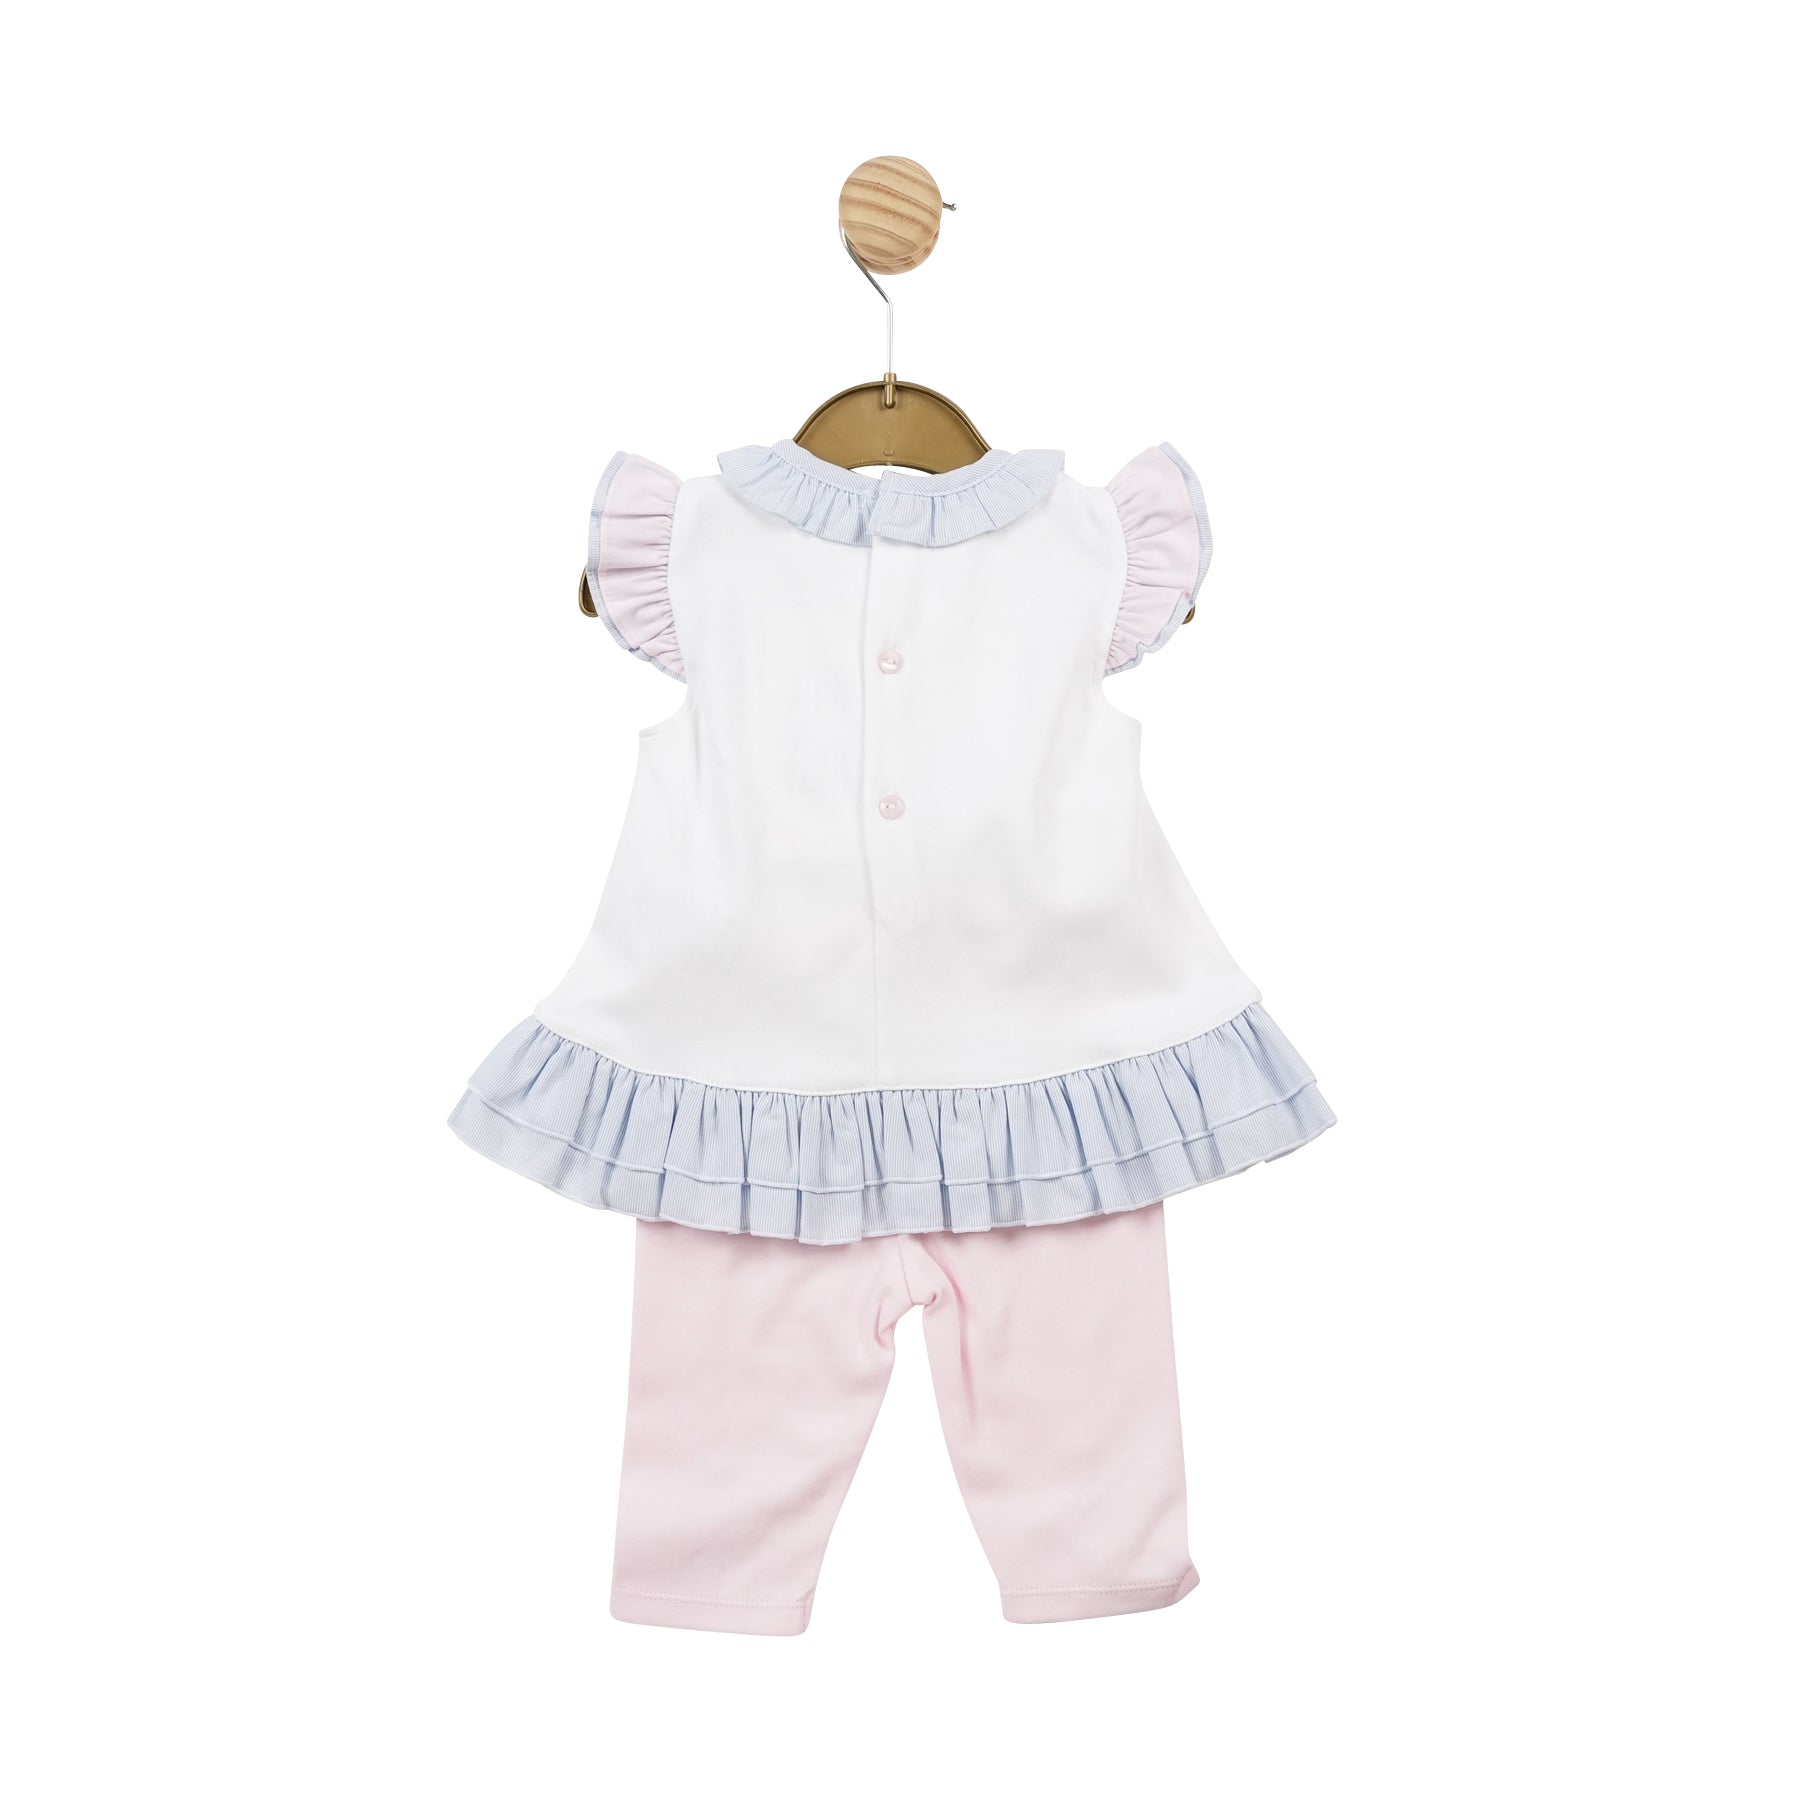 <p>This adorable girls tunic and legging set from childrens boutique brand Mintini Baby is the perfect addition to any little girl's spring and summer wardrobe. The two piece set features a white top with a blue frilly collar and pink and blue frills on the arms, and a matching blue frill around the bottom with a large bow in the middle. The pink leggings with blue bows on the ankle add the perfect finishing touch. Available in sizes 3 months up to 5 years.